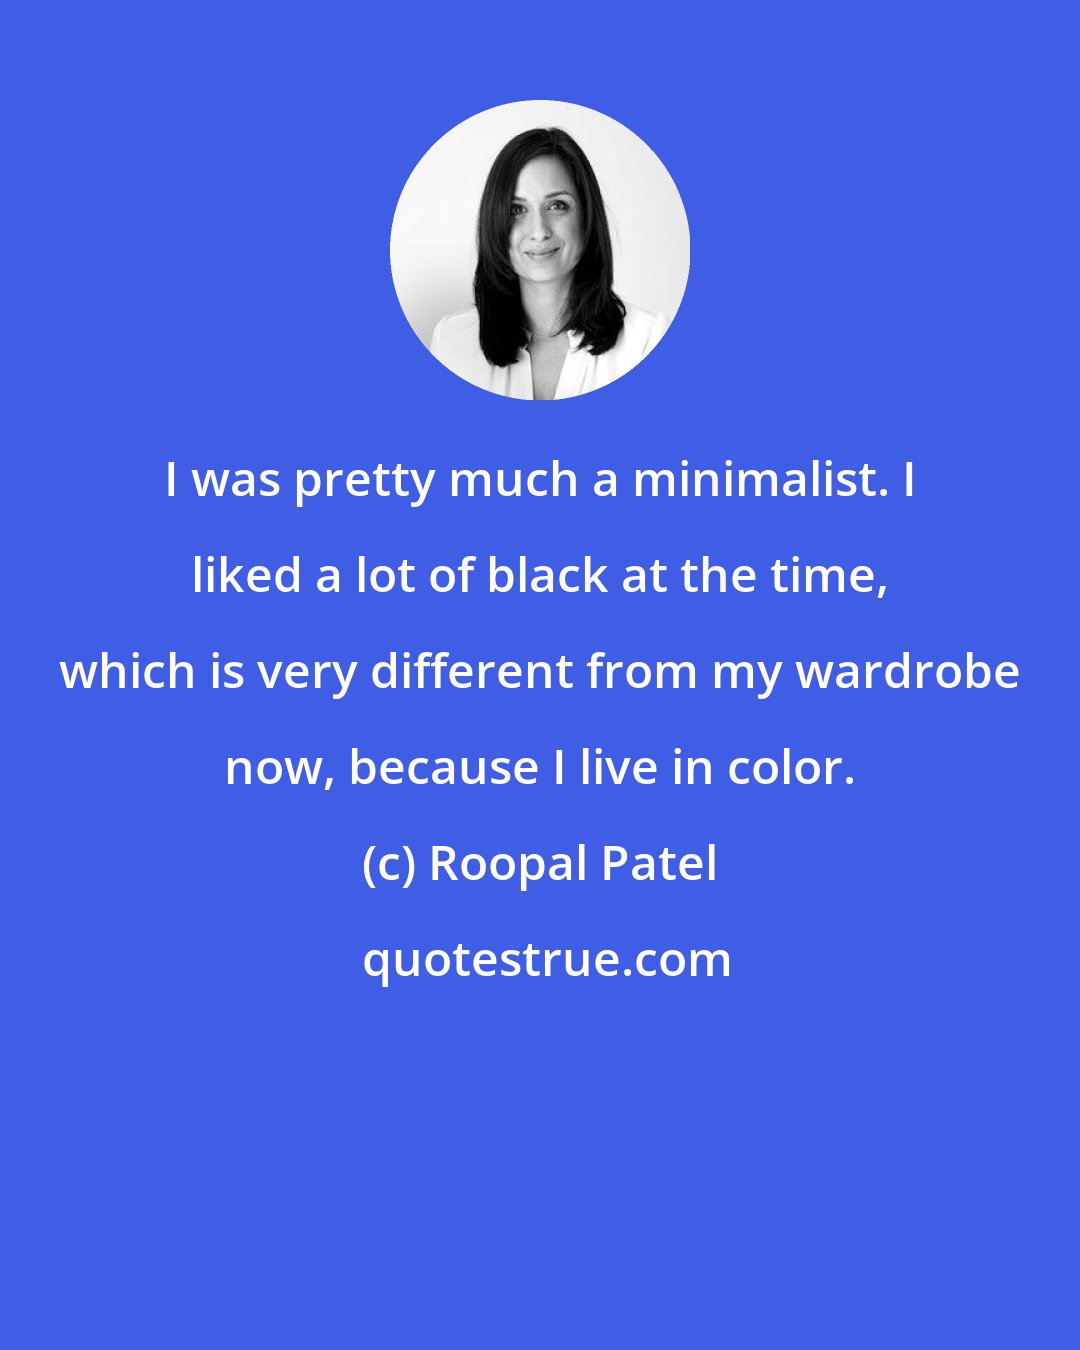 Roopal Patel: I was pretty much a minimalist. I liked a lot of black at the time, which is very different from my wardrobe now, because I live in color.